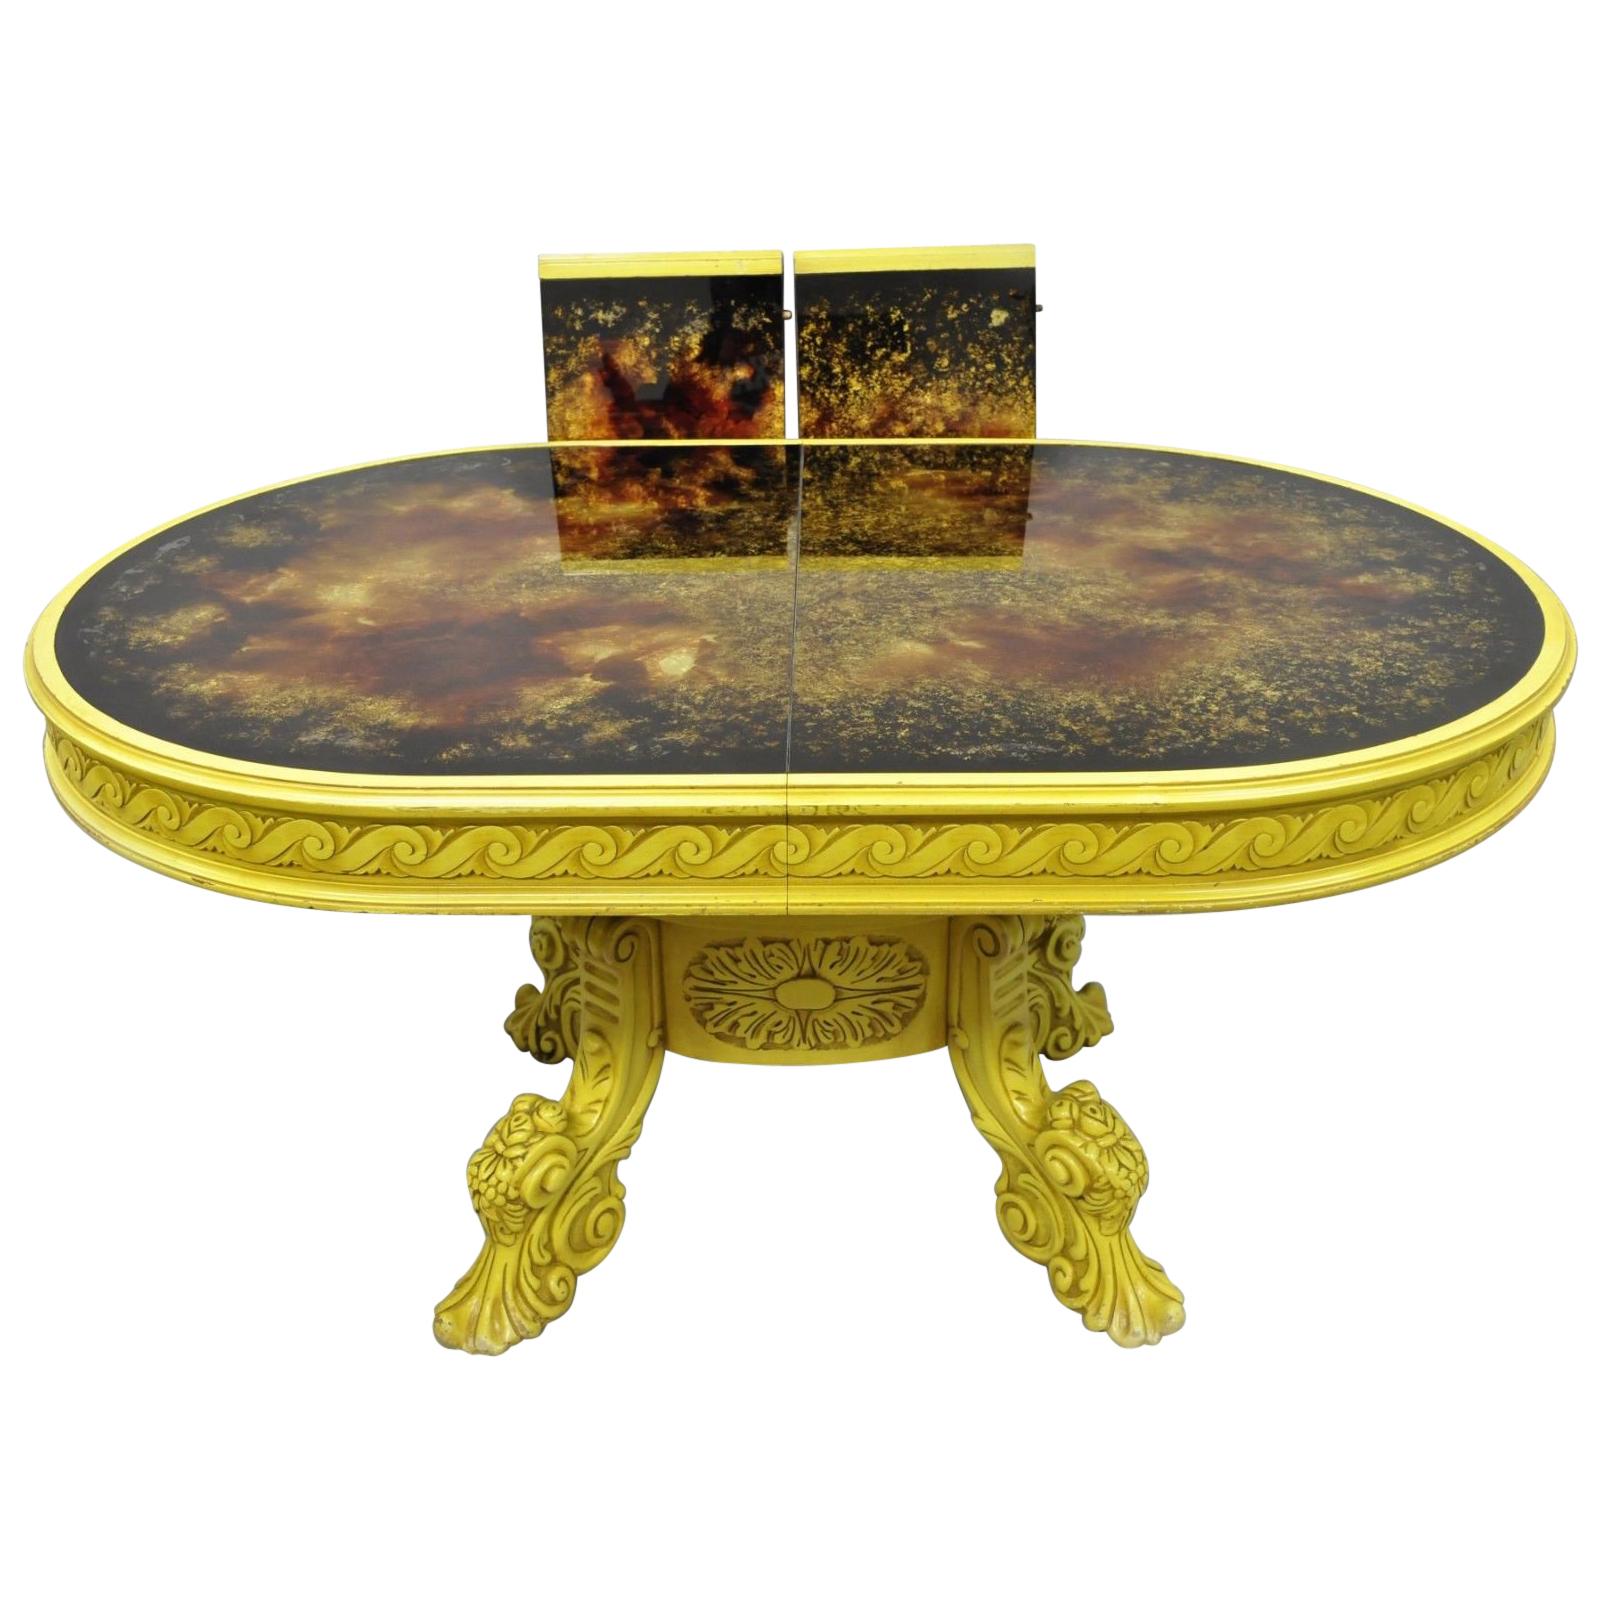 French Baroque Rococo Style Oval Eglomise Art Glass Top Yellow Dining Table For Sale